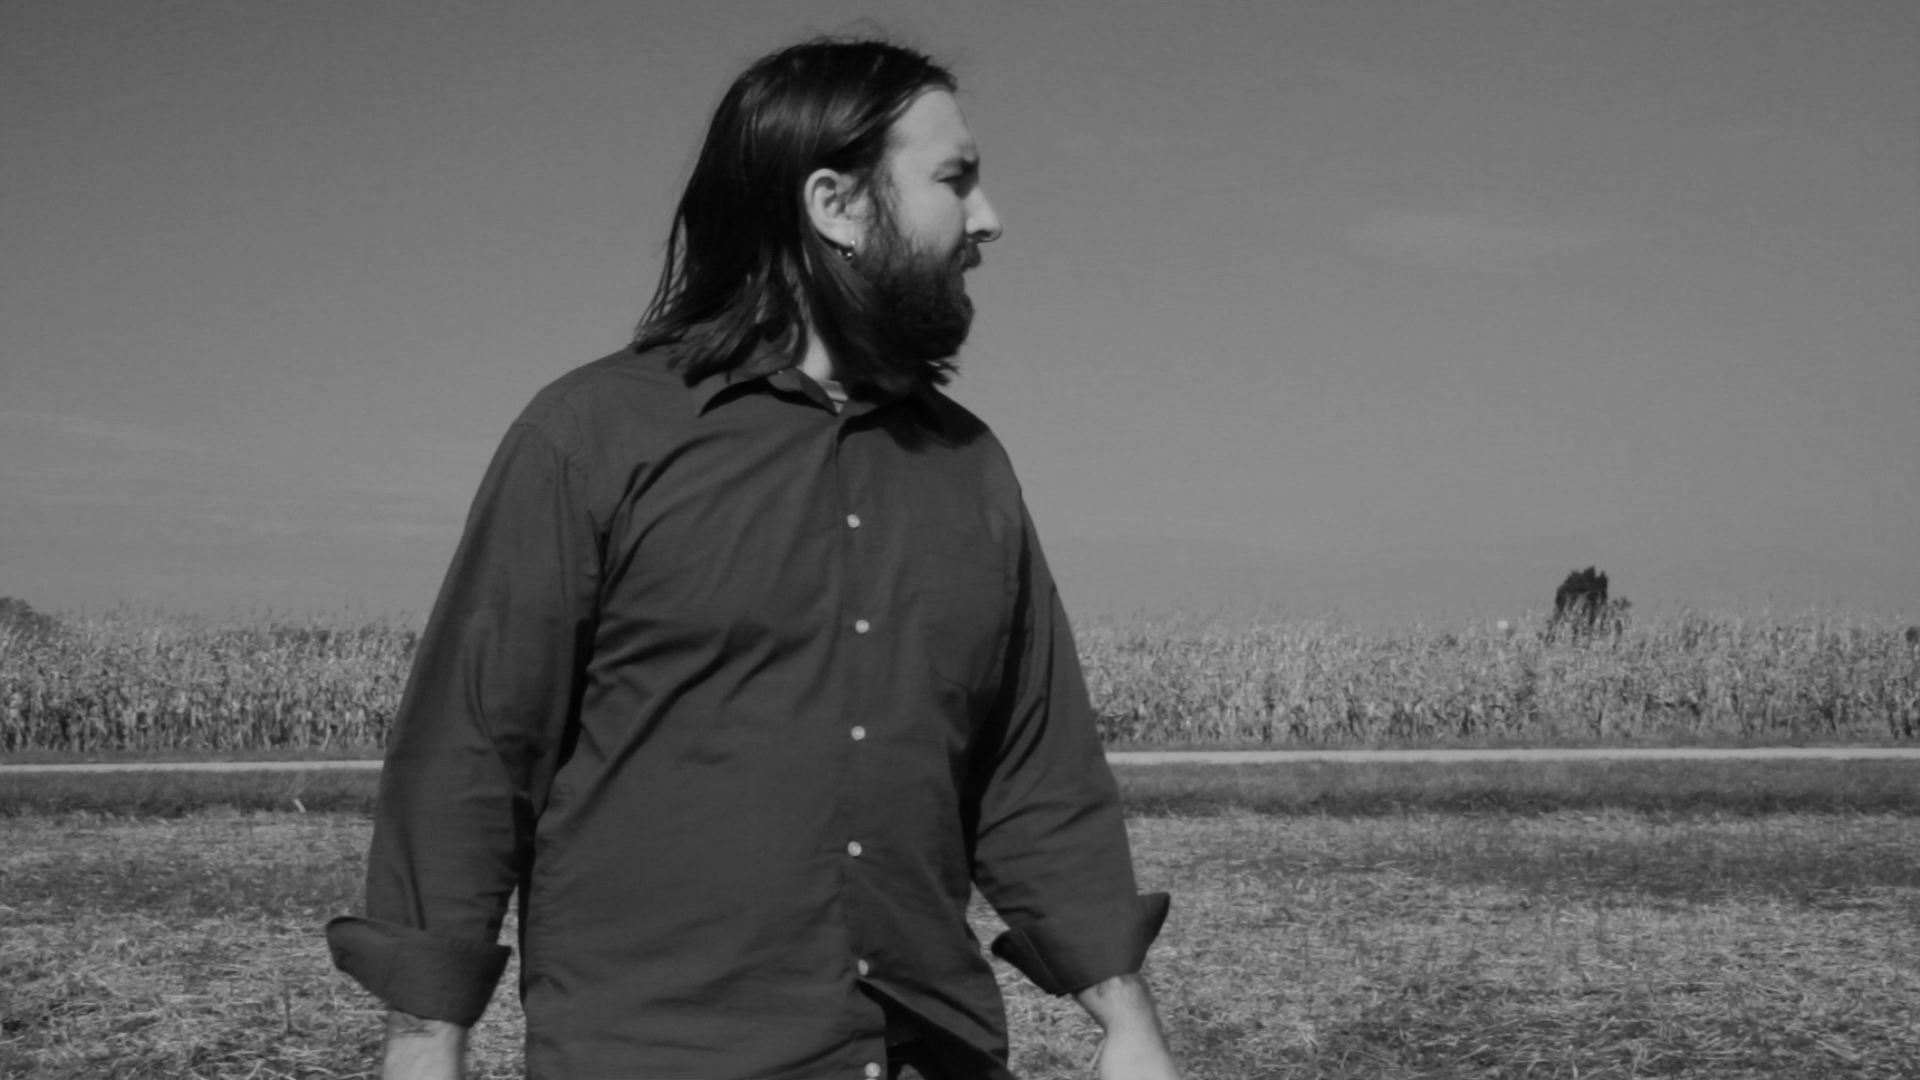 Thom Stark on location in Hanover, Indiana during production of his debut short film, Note to Self.